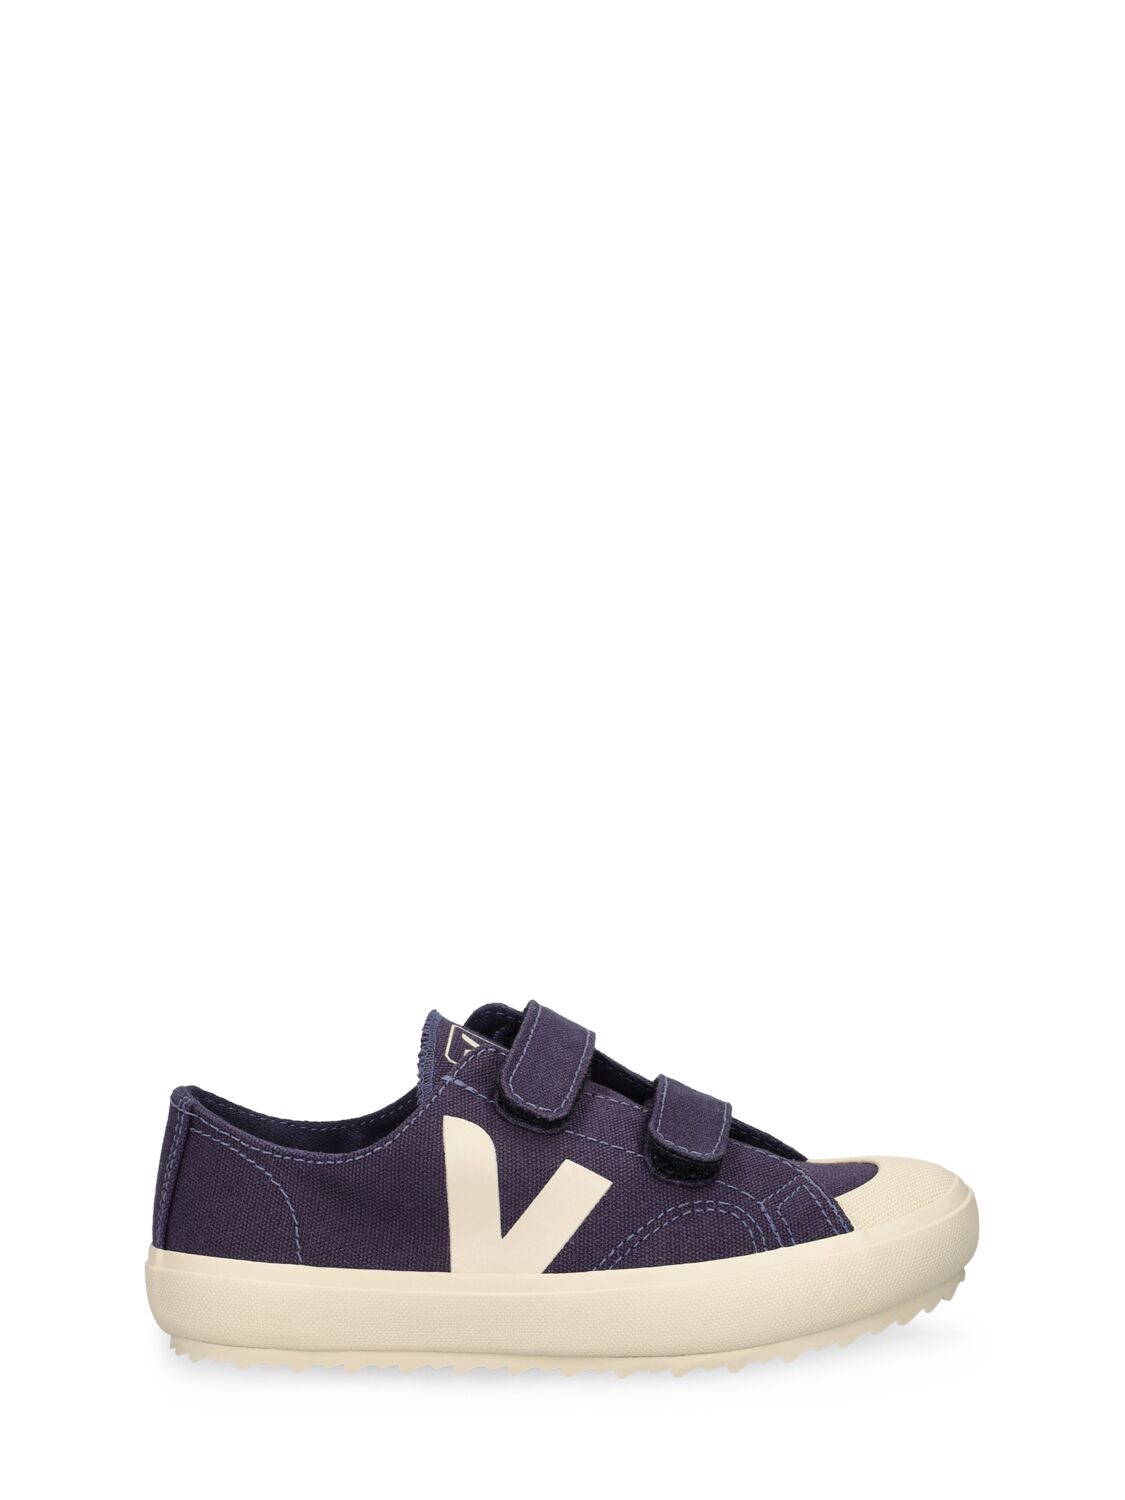 Image of Organic Cotton Canvas Strap Sneakers